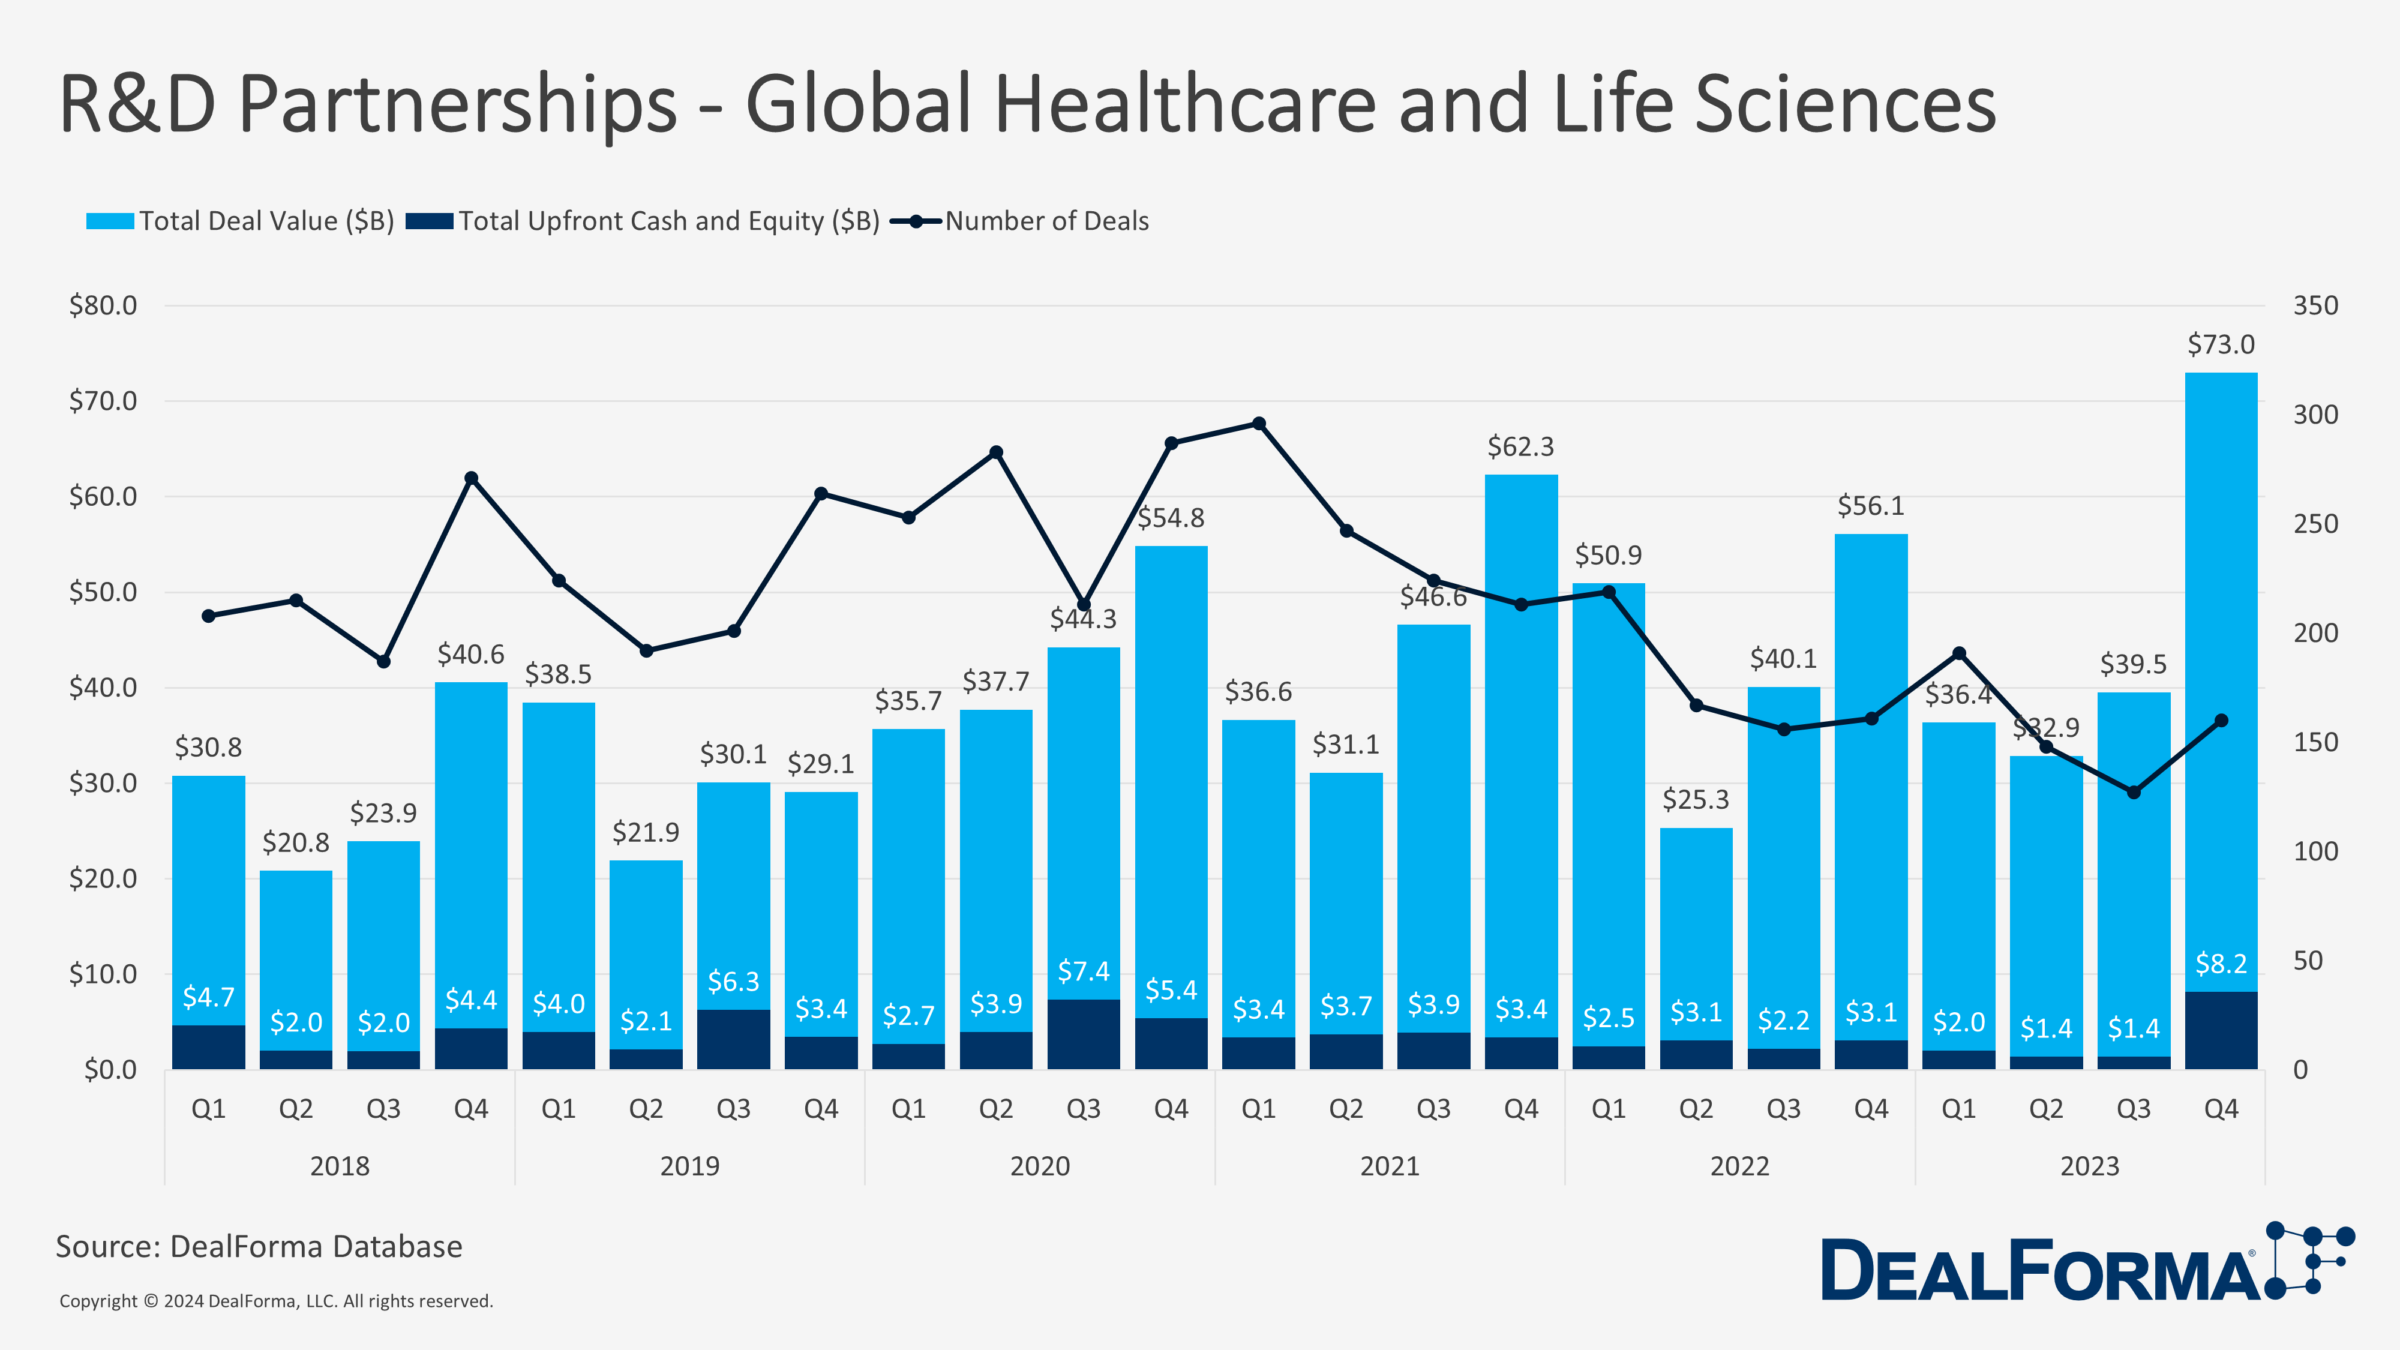 R&D Partnerships - Global Healthcare and Life Sciences - DealForma